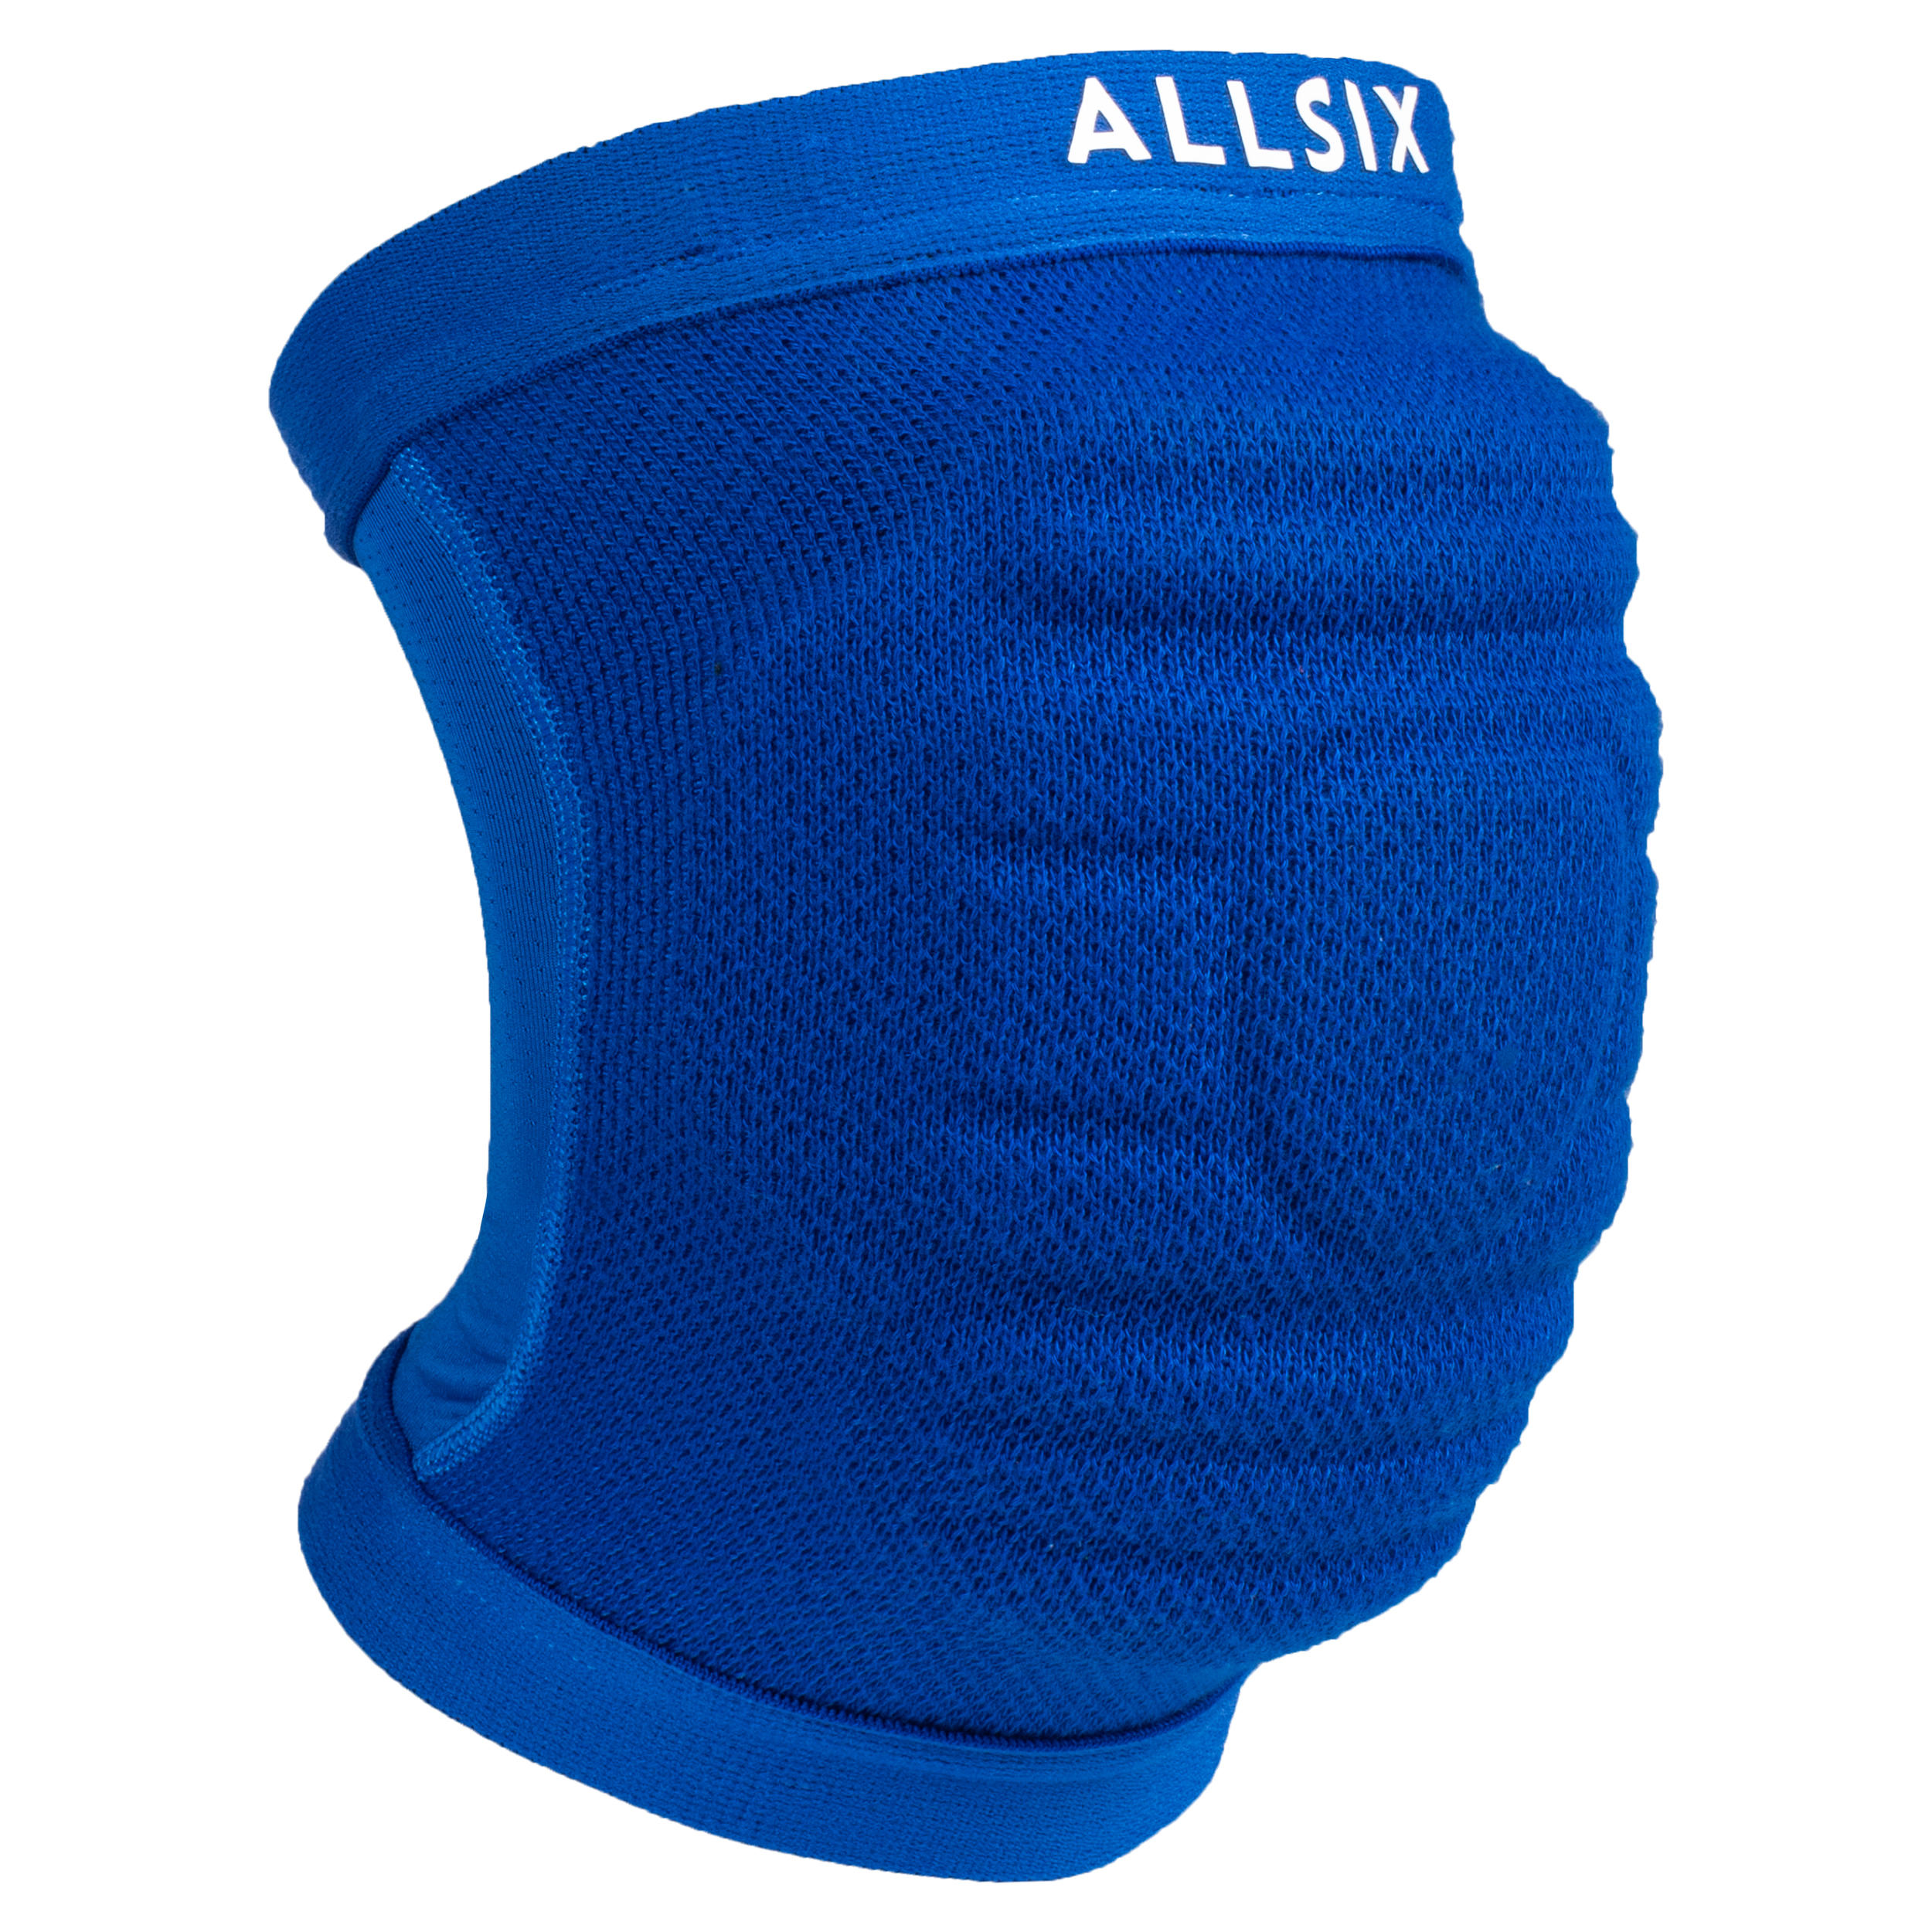 Volleyball Knee Pads VKP900 - Blue 3/5